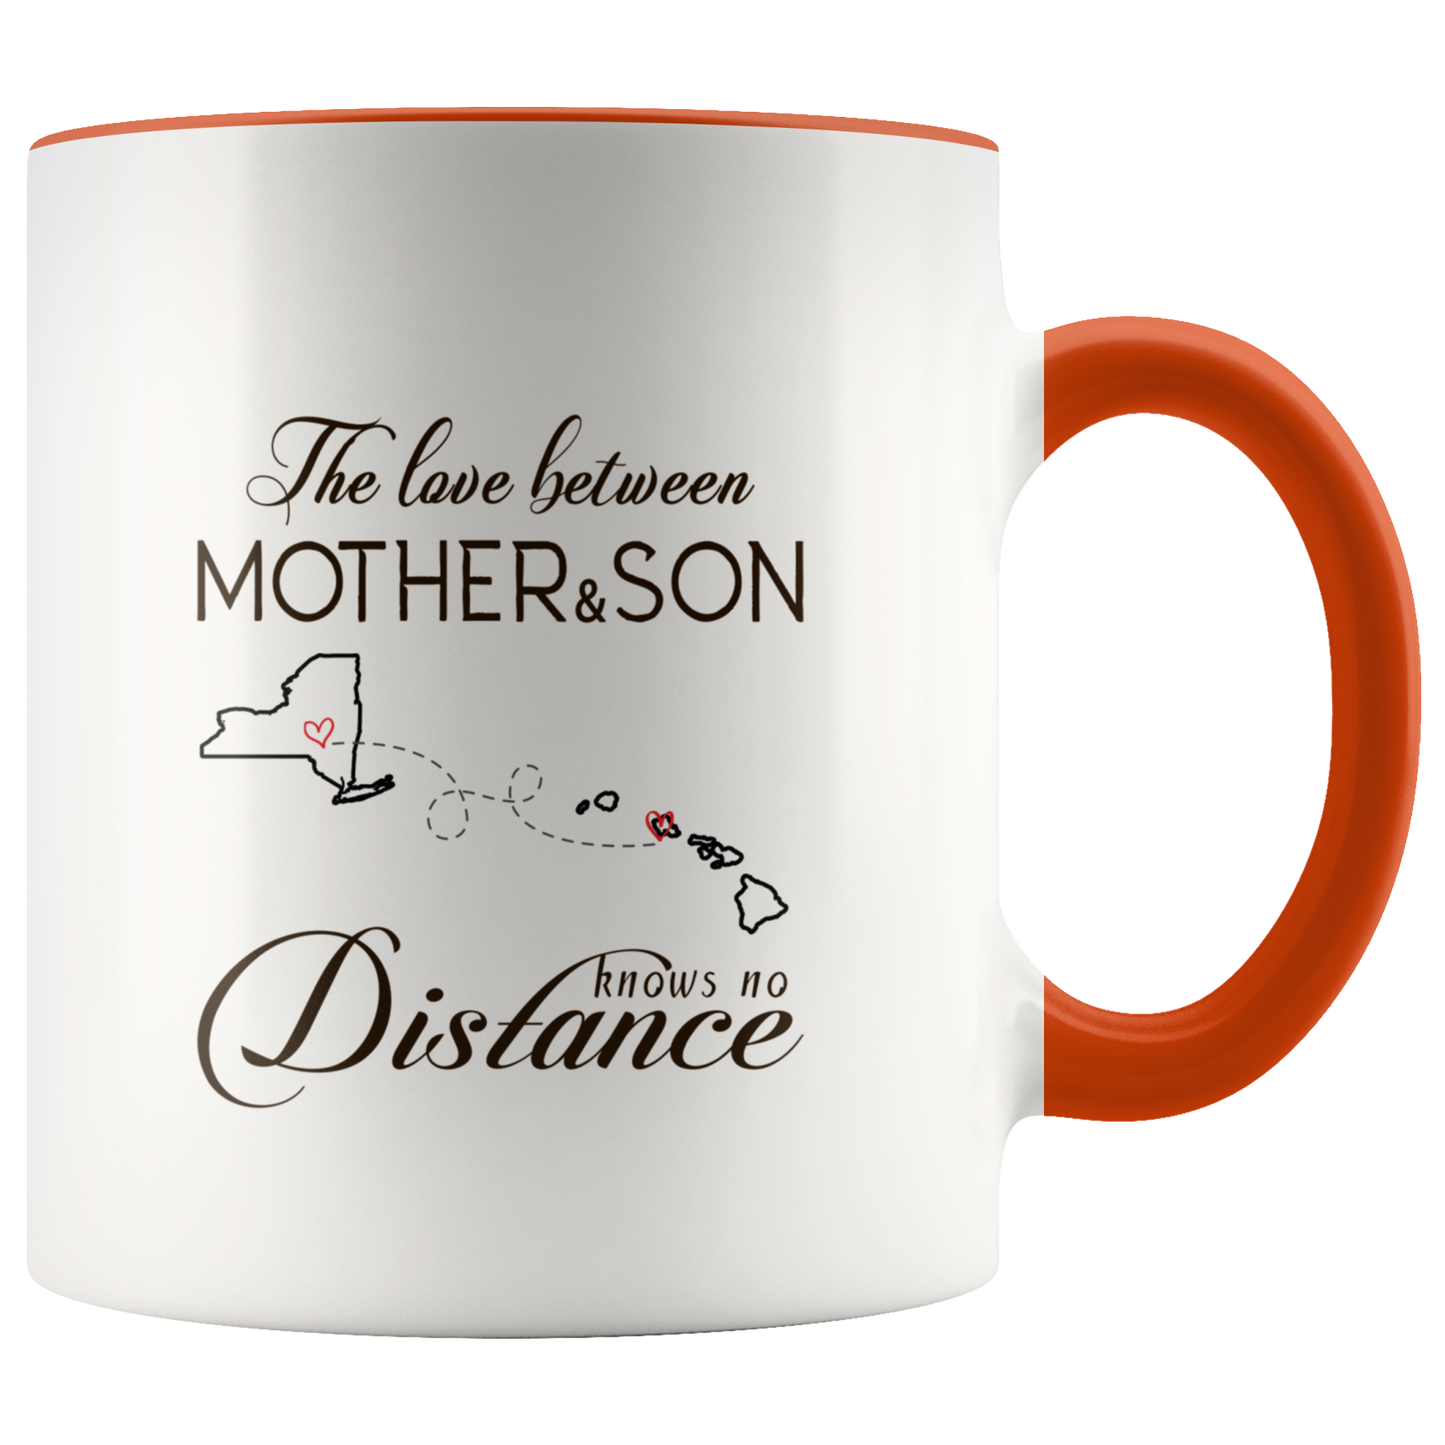 ND-21335644-sp-23489 - Long Distance Accent Mug 11 oz Red - The Love Between Mother